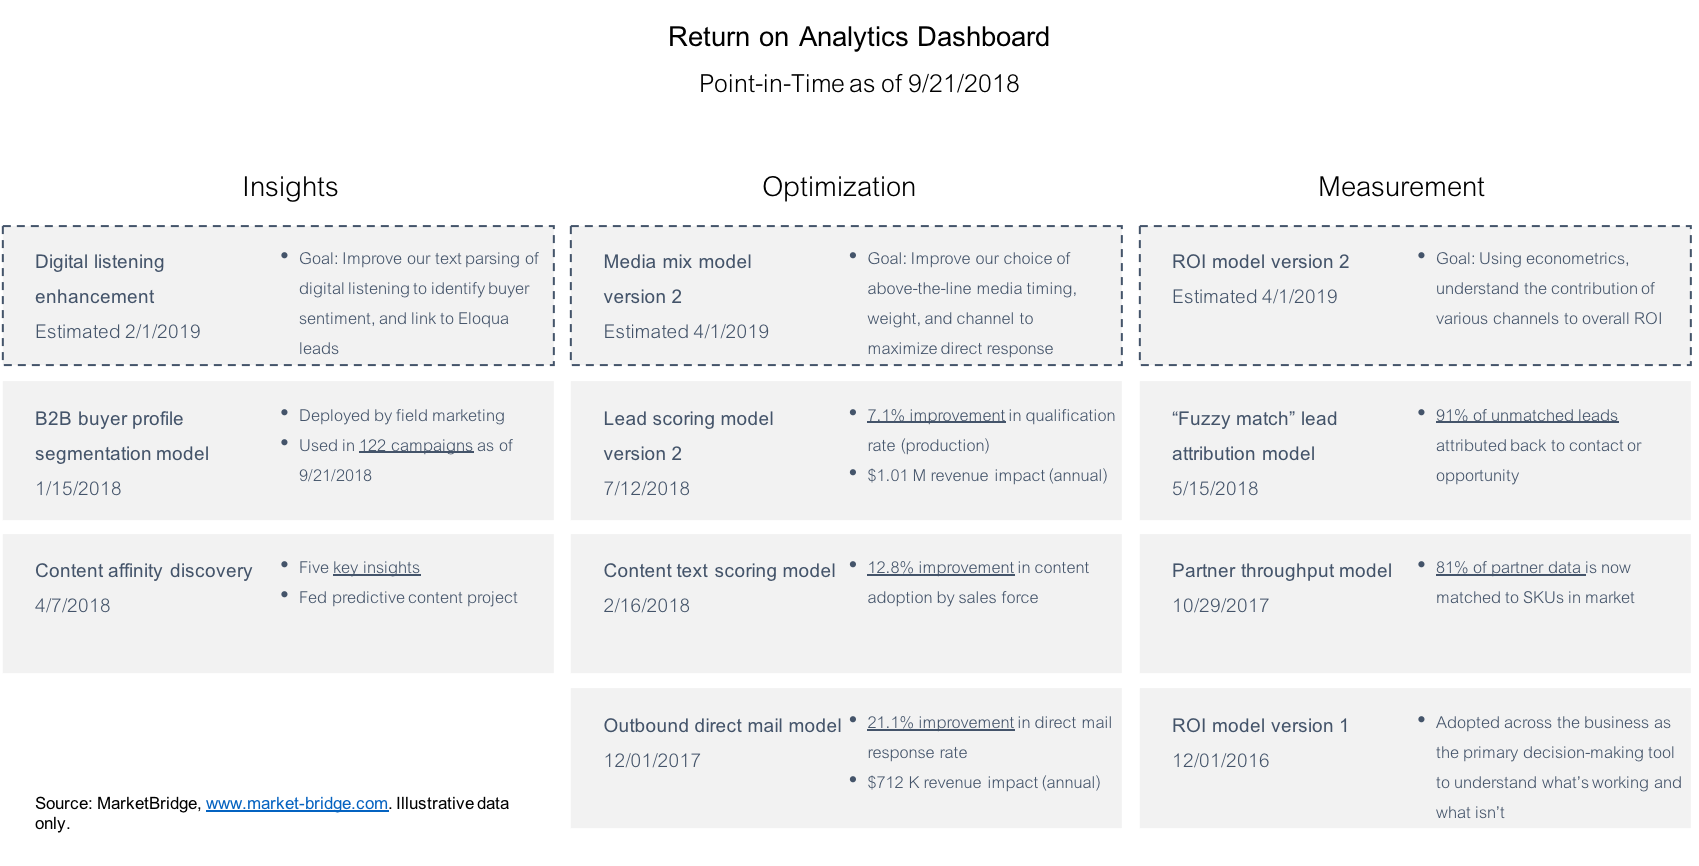 A Return on Analytics dashboard makes it clear what analytics and data science has done for the company—and where it's headed.